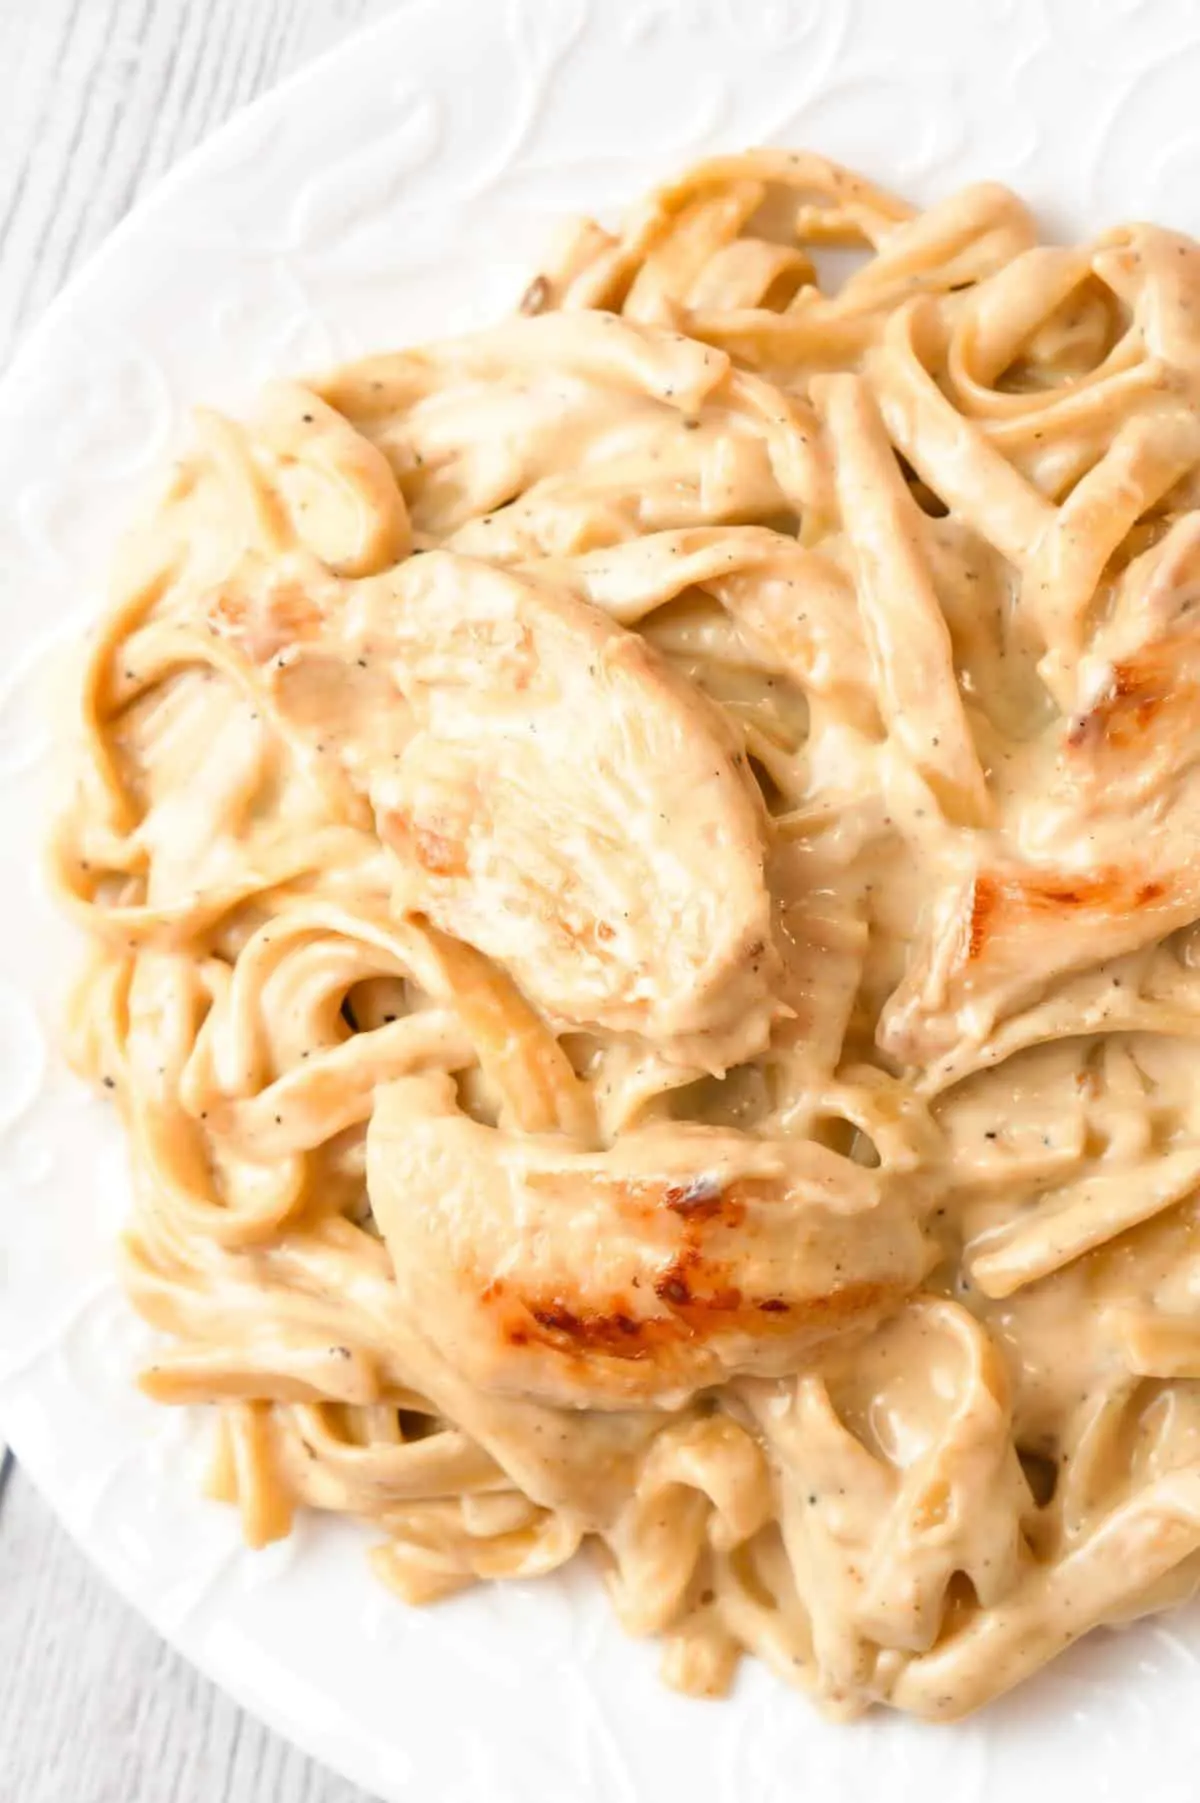 One Pot Fettuccine Alfredo with Chicken is an easy and delicious pasta recipe with a creamy garlic Parmesan sauce and loaded with slices of chicken breast.